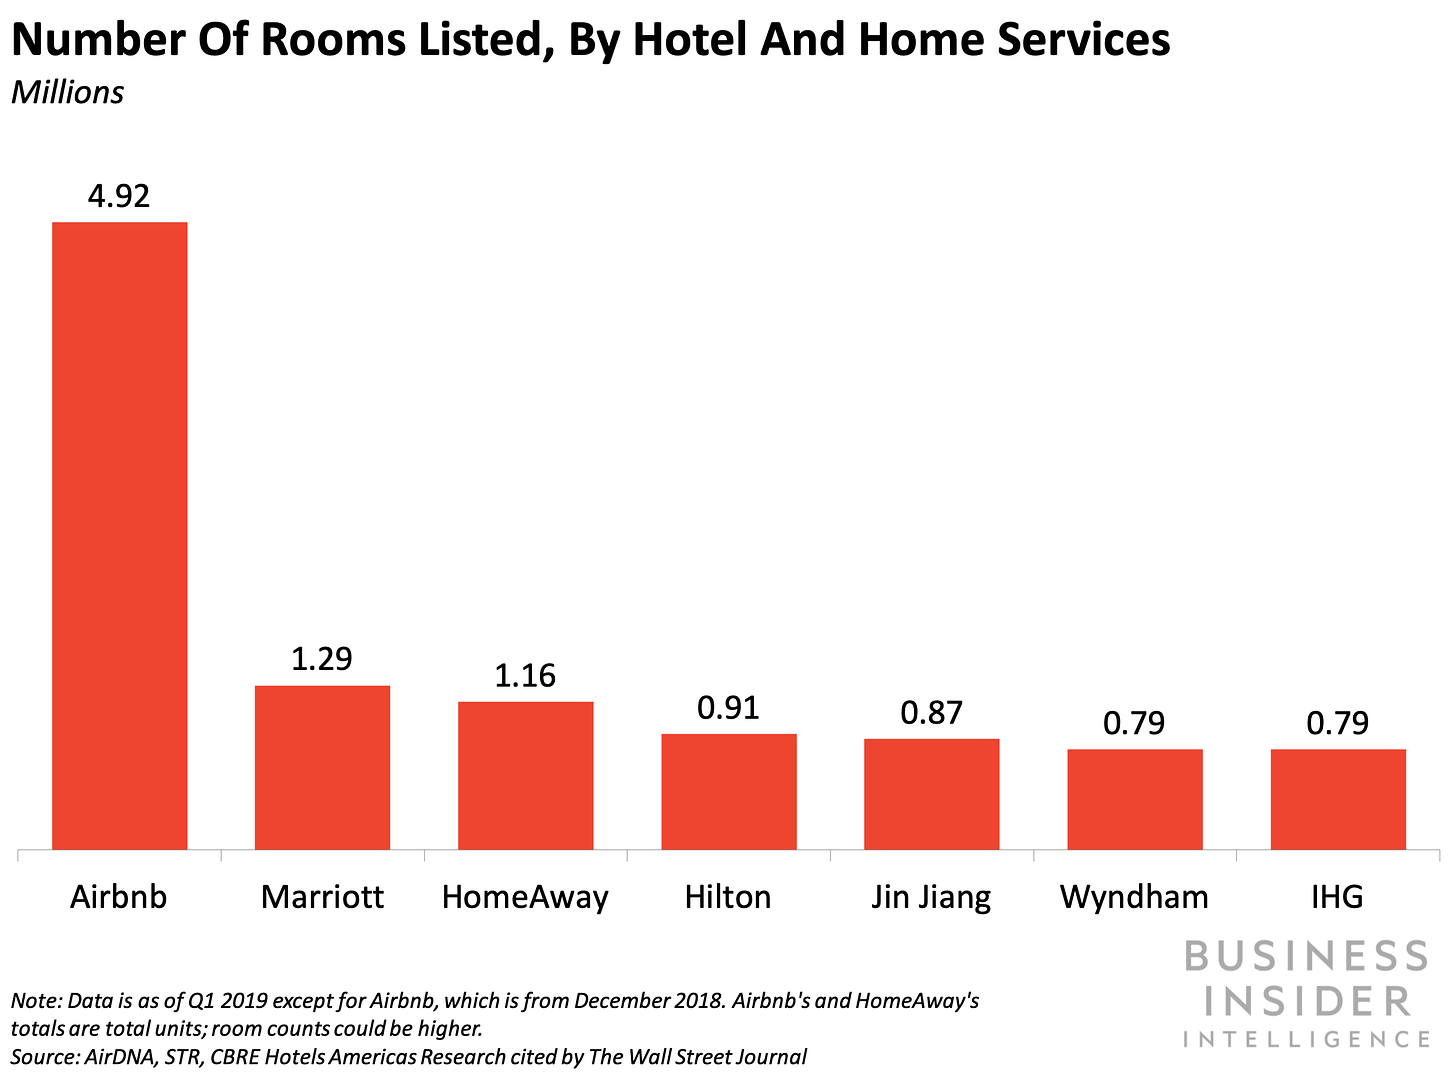 Marriott Launches Home Rentals to Battle Airbnb - Business Insider